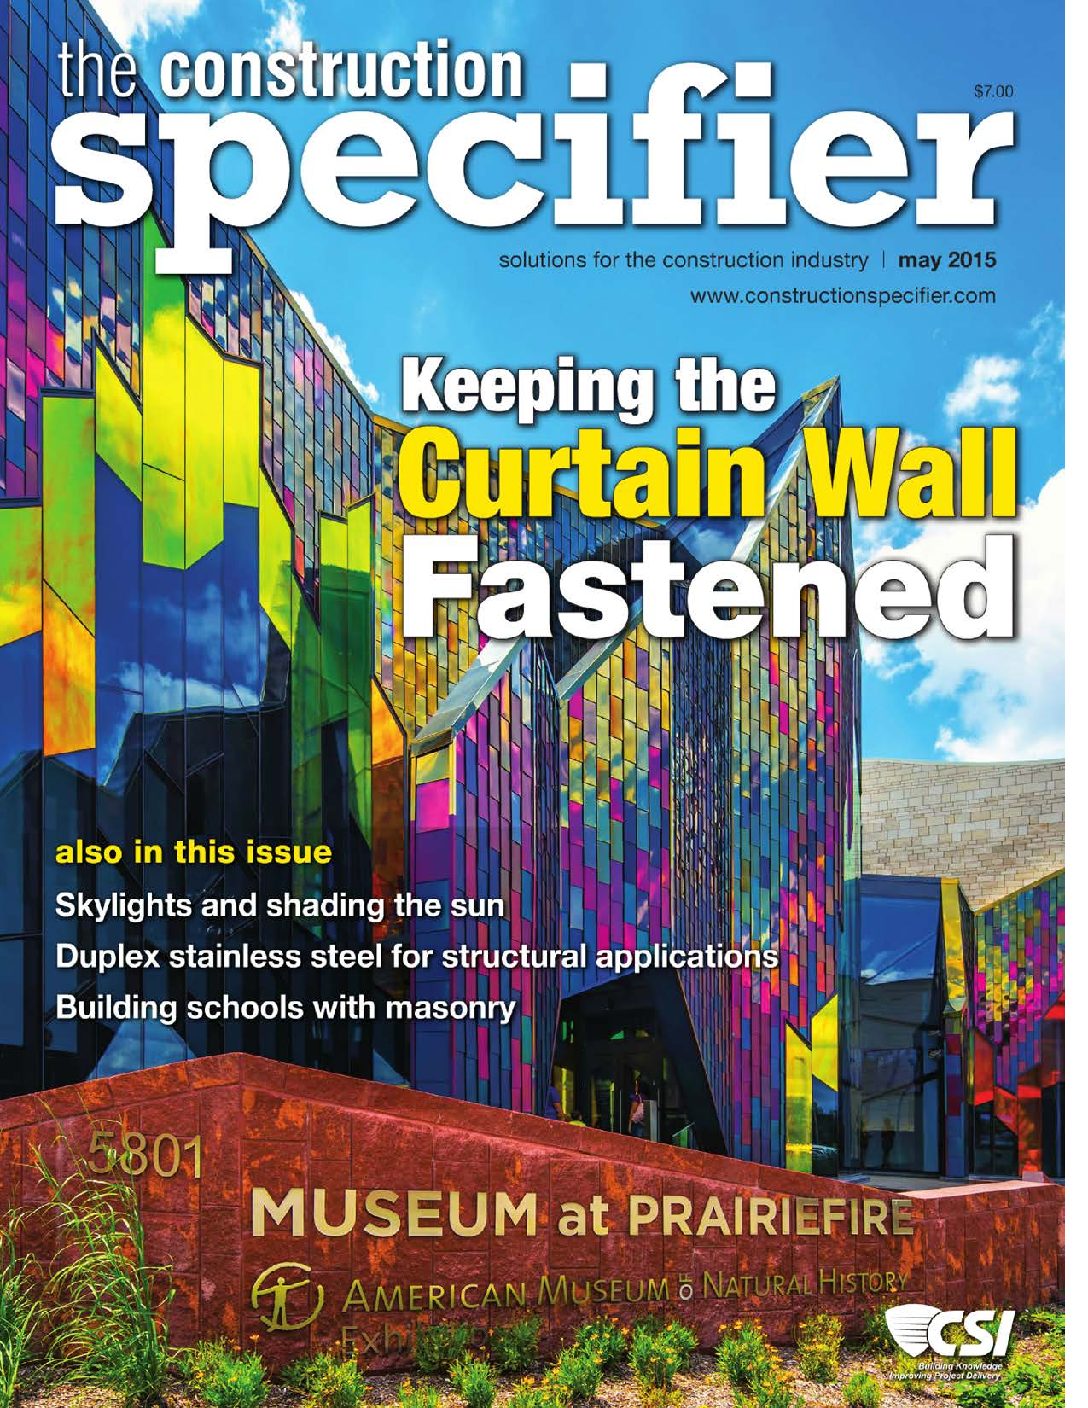 MUSEUM AT PRAIRIEFIRE: THE CONSTRUCTION SPECIFIER